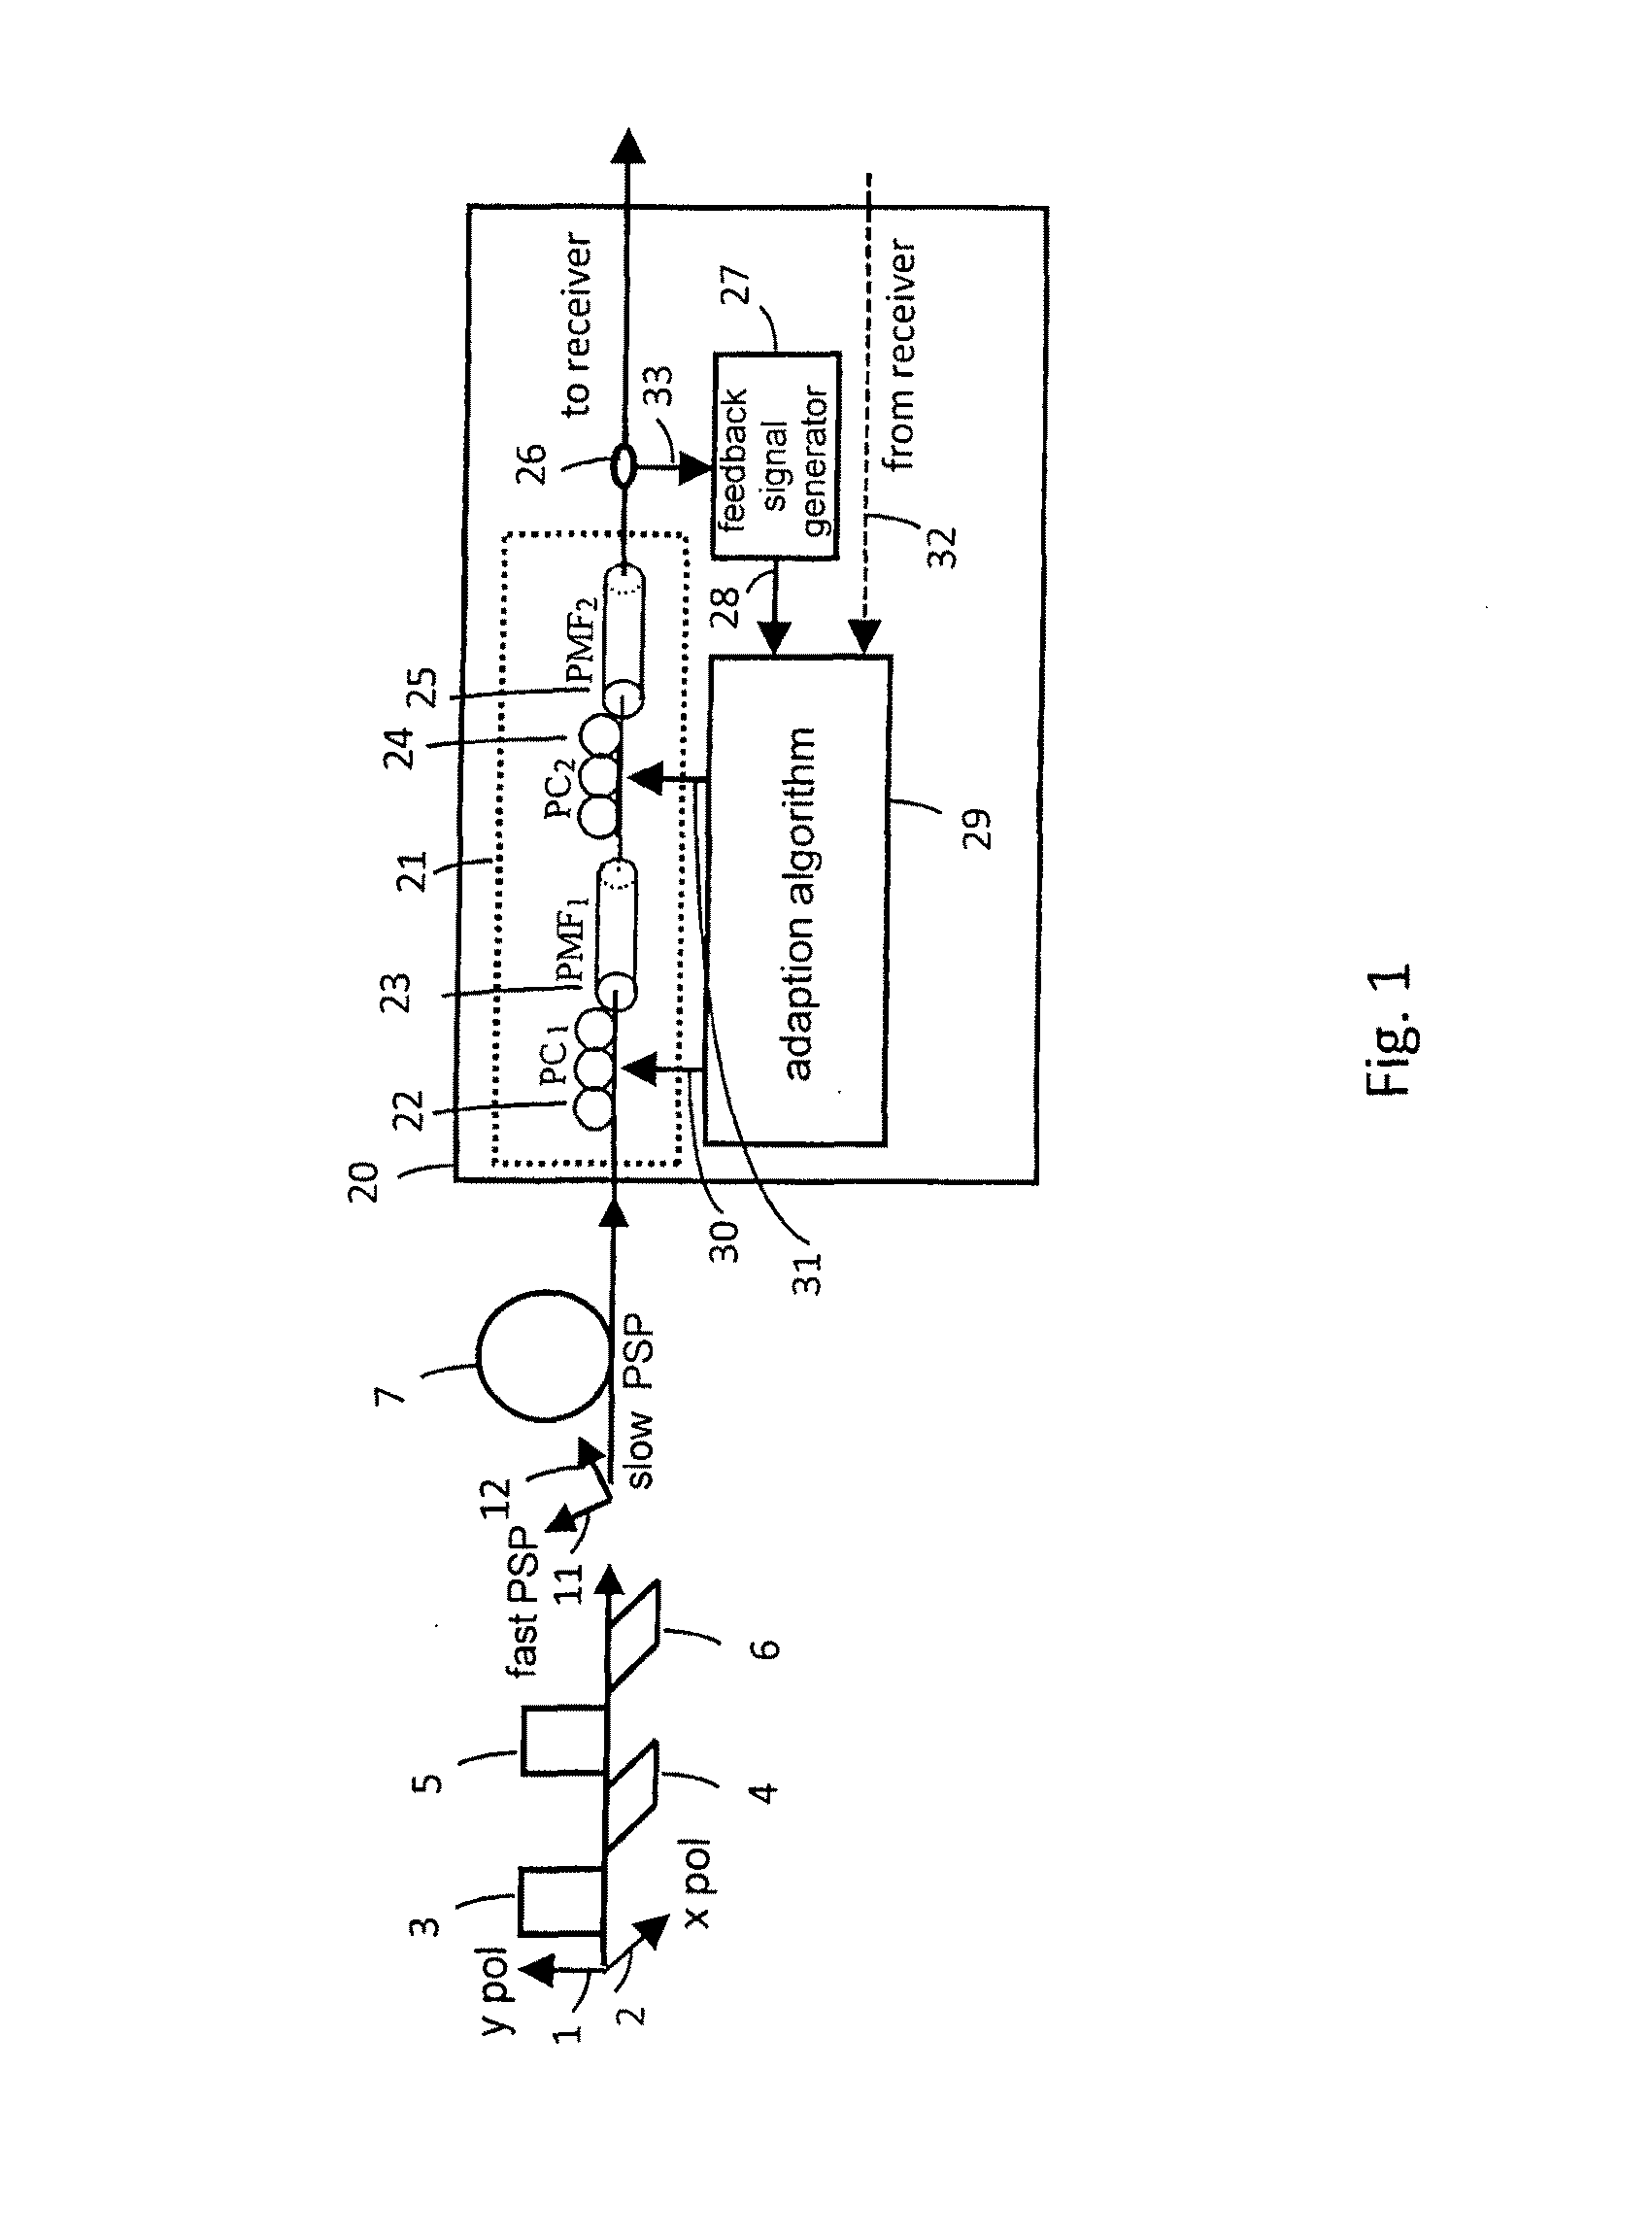 Generation of a feedback signal for a polarization mode dispersion compensator in a communication system using alternate-polarization